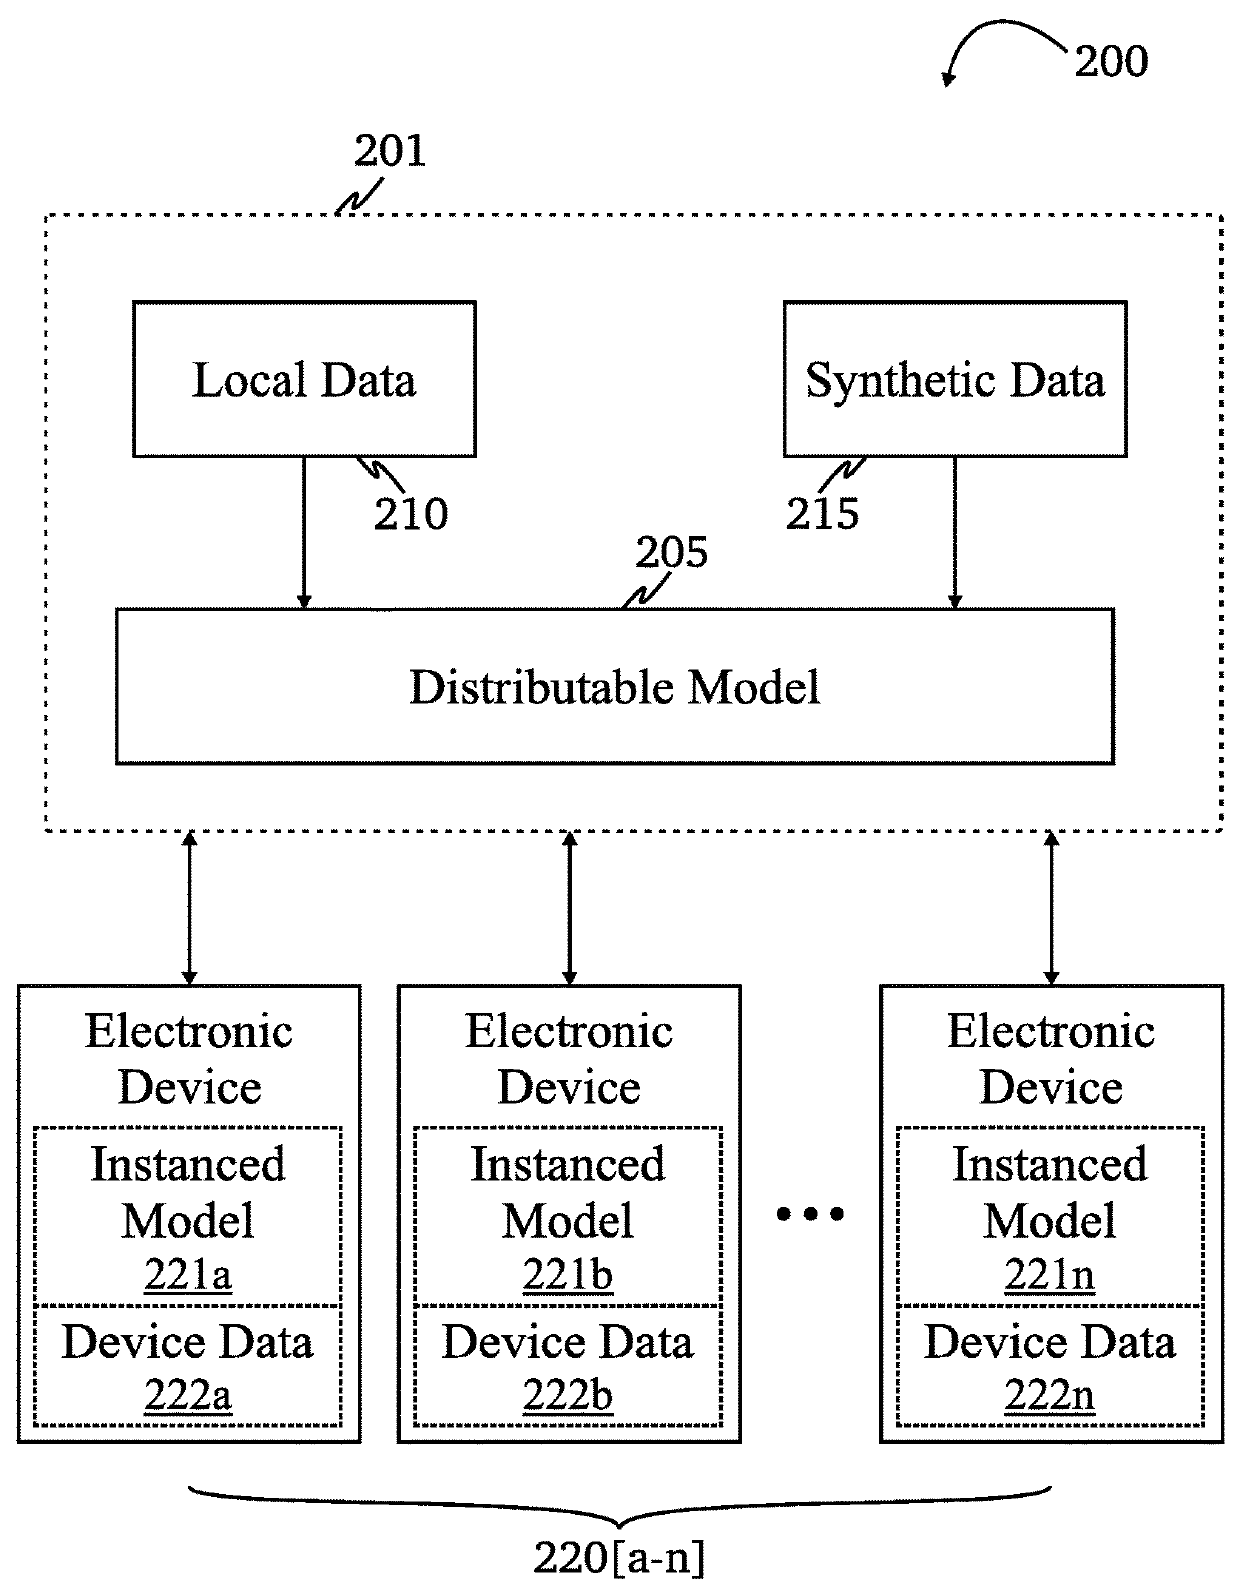 Distributable model with biases contained within distributed data